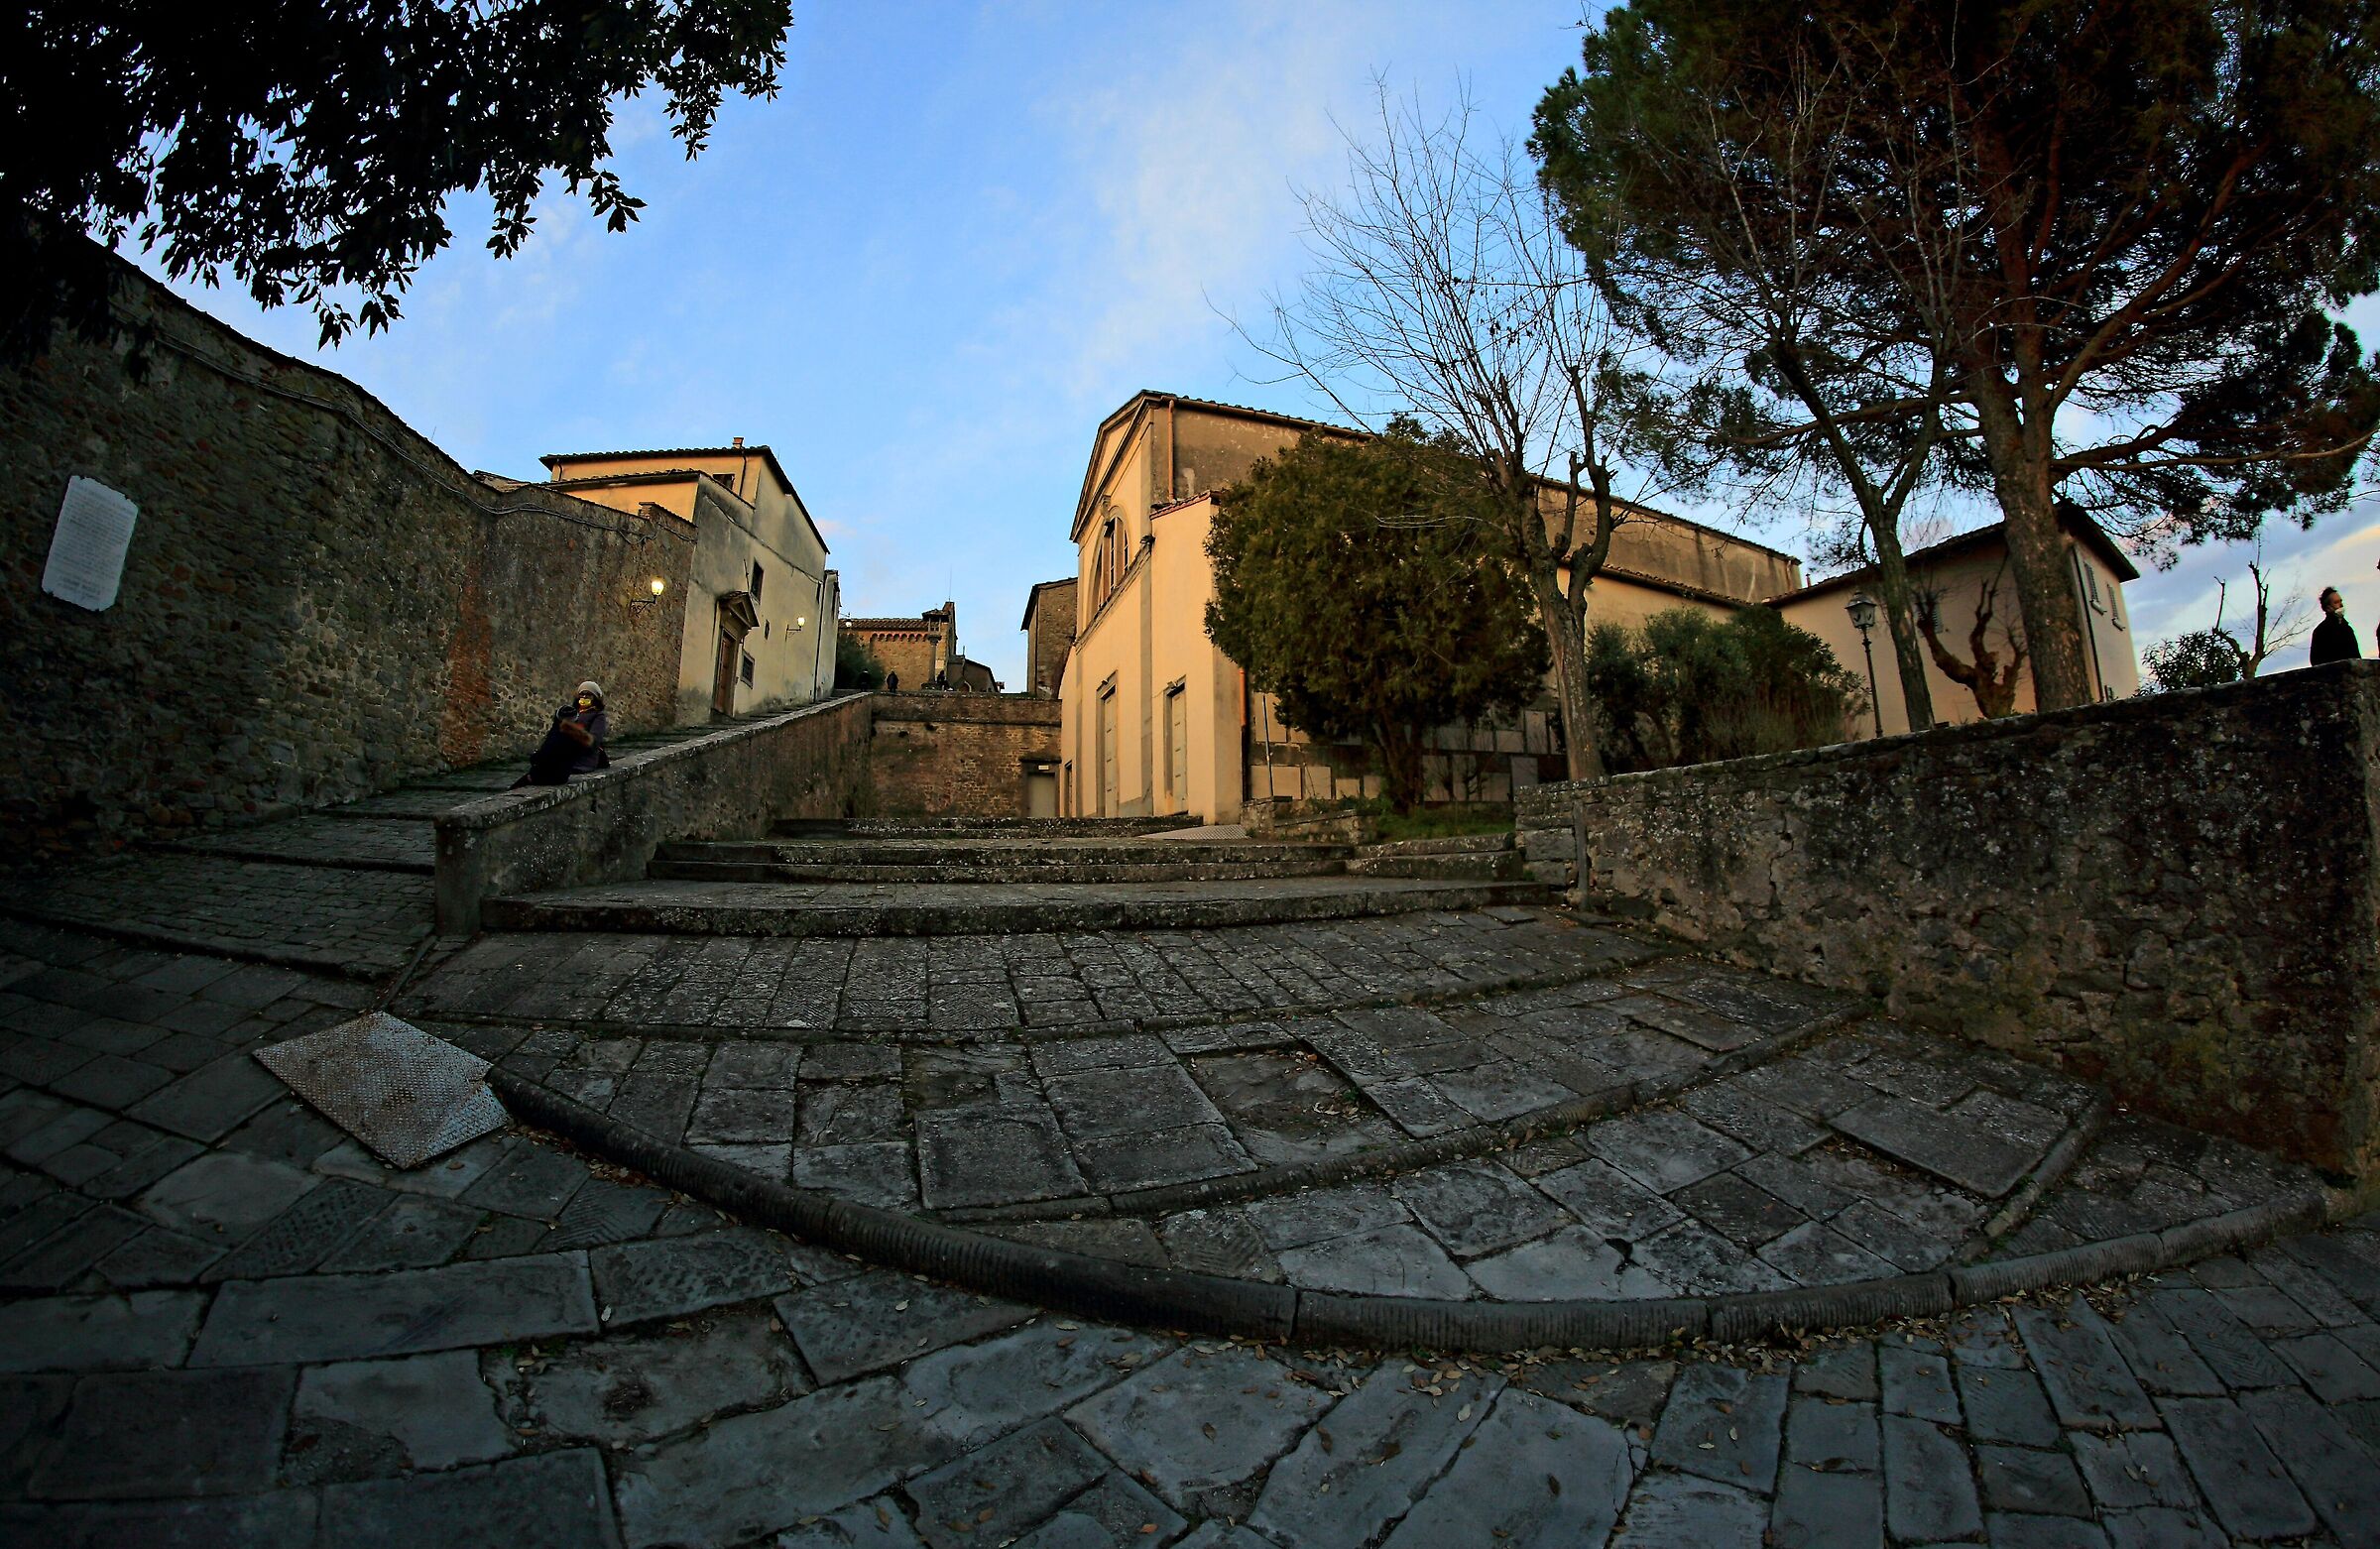 Towards the convent of San Francesco in Fiesole ...